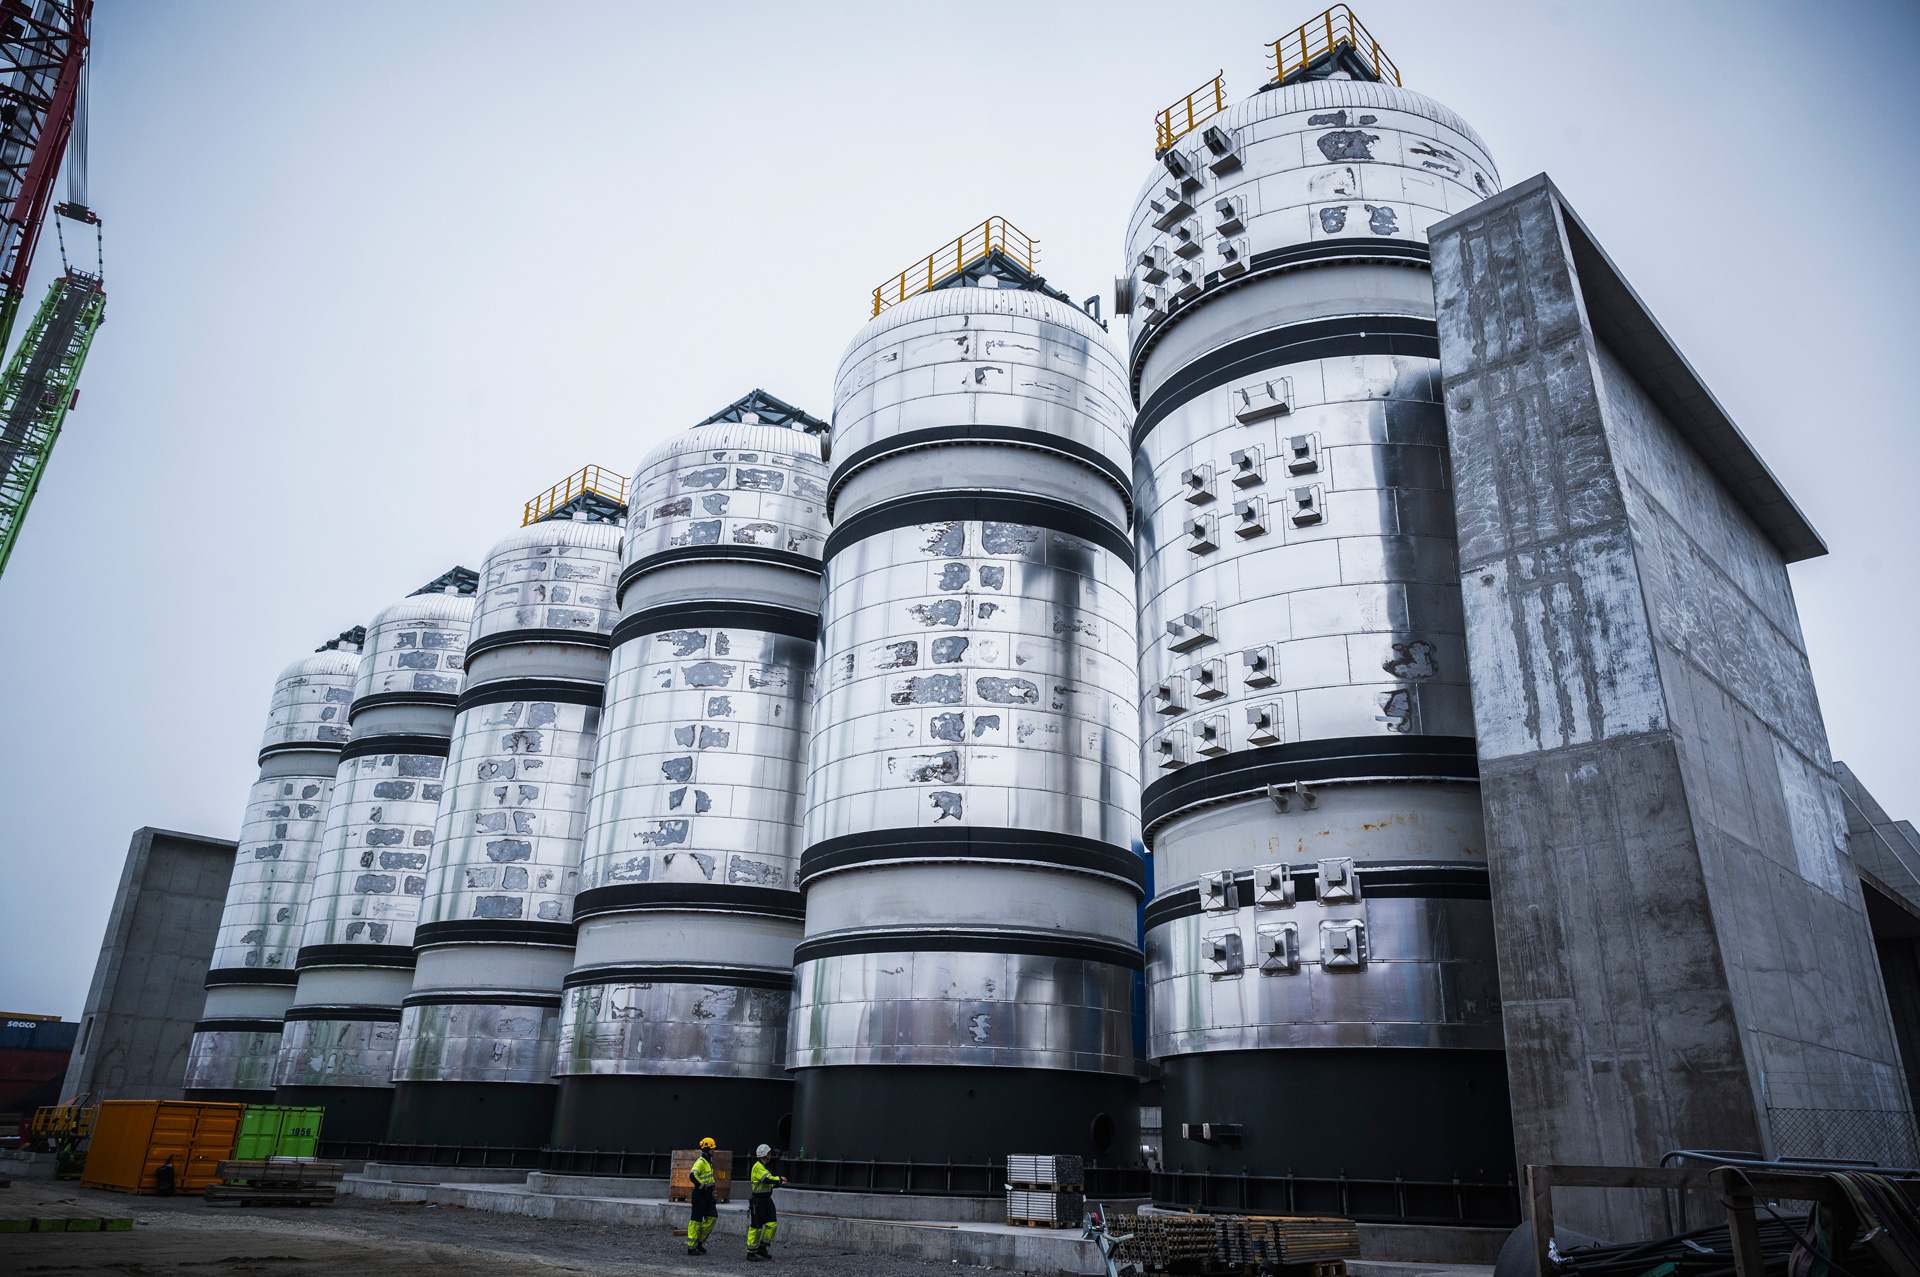 Series of large cylindrical structures with conical tops, resembling industrial silos. These metal structures have visible access points, ladders, and safety railings. Despite their size, they appear even more massive when compared to the two individuals standing at their base, both wearing safety gear. The overcast sky suggests an industrial setting on a cloudy day.